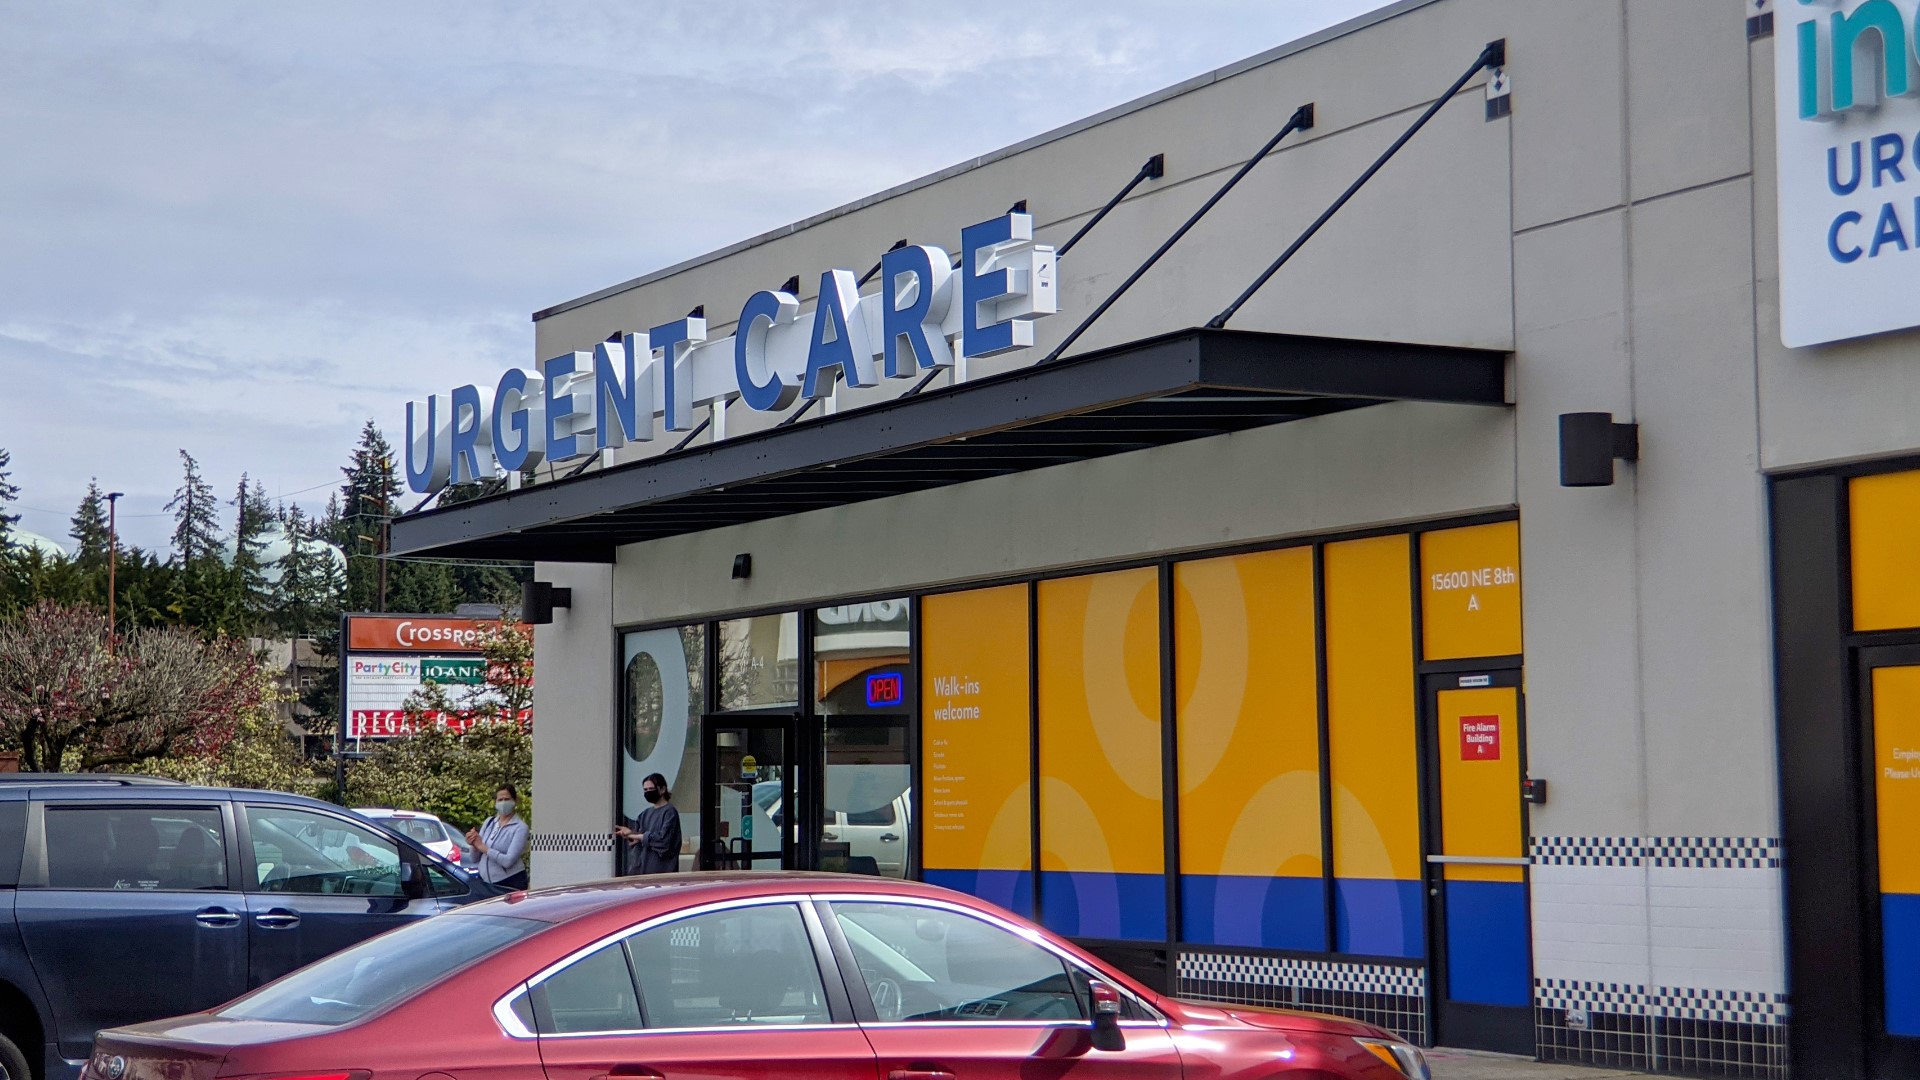 The vote was approved by a 96% margin. Twenty-four urgent care locations could close in as little as ten days